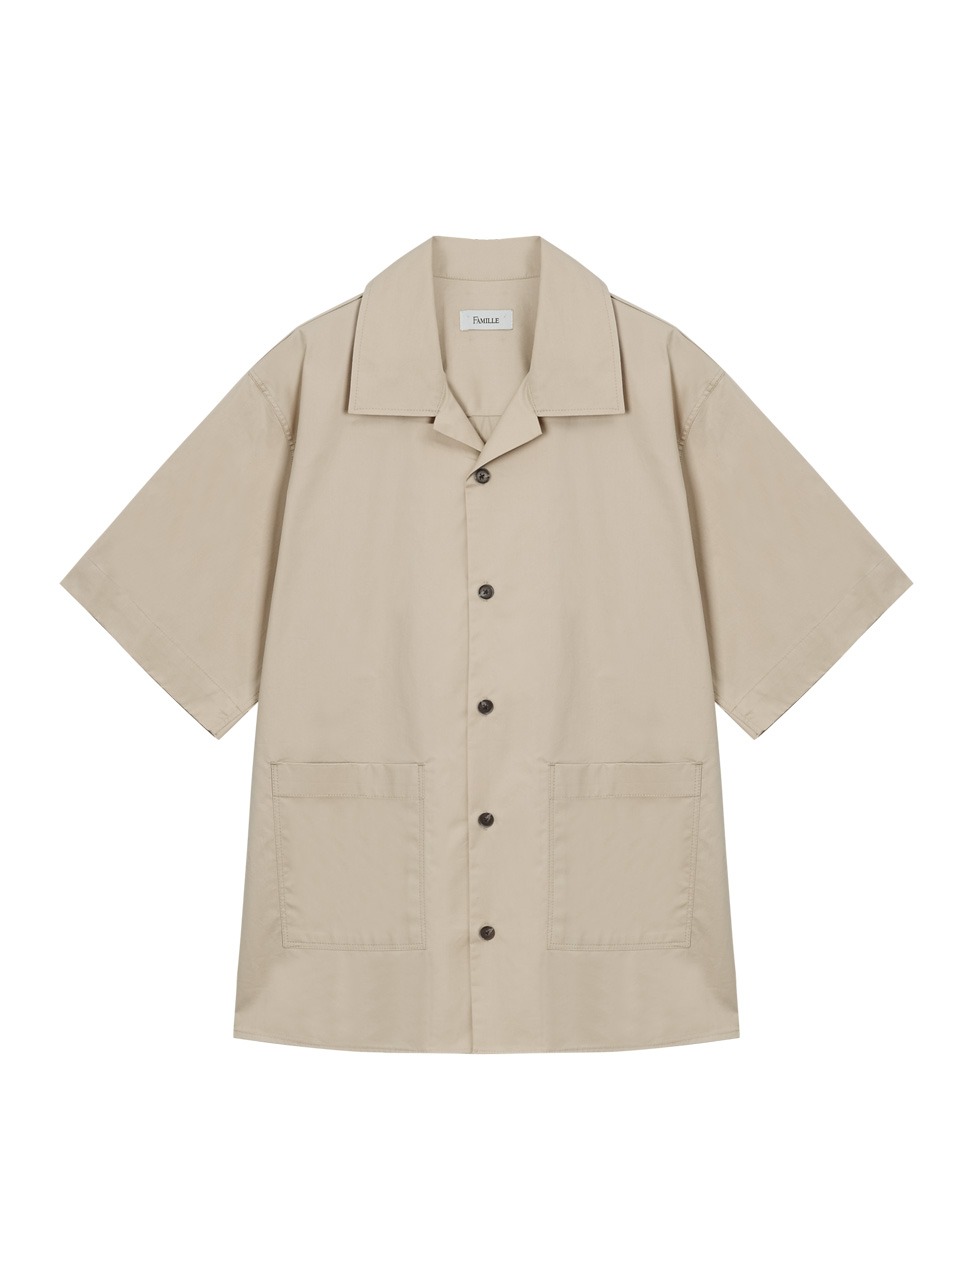 FAMILLE - OVERSIZED OPEN COLLAR OUT POCKET SHIRT (BEIGE)